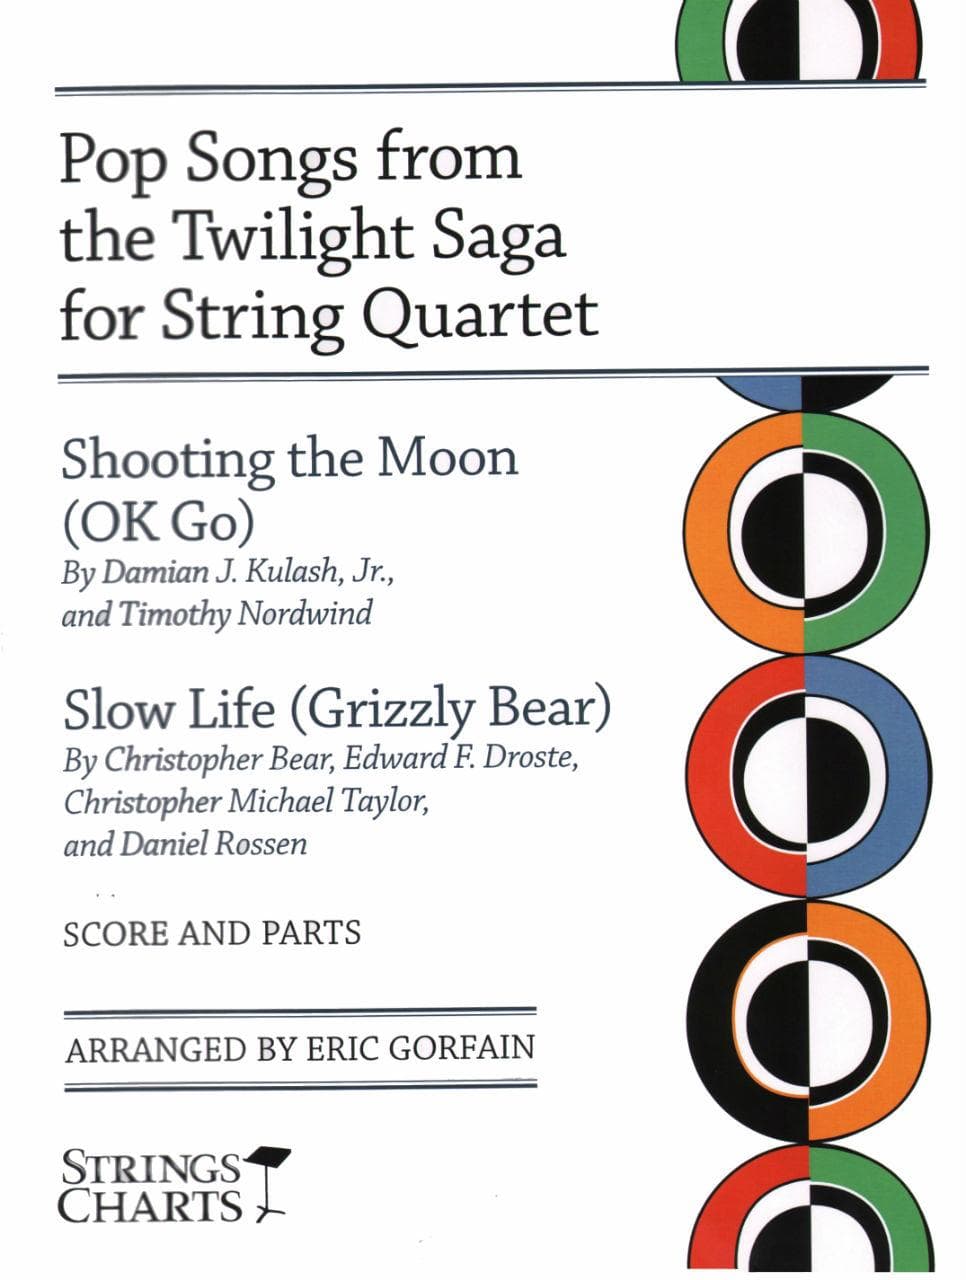 OK Go / Grizzly Bear - Pop Songs from the Twilight Saga for String Quartet - Score and Parts - arranged by Eric Gorfain - String Letter Publishing